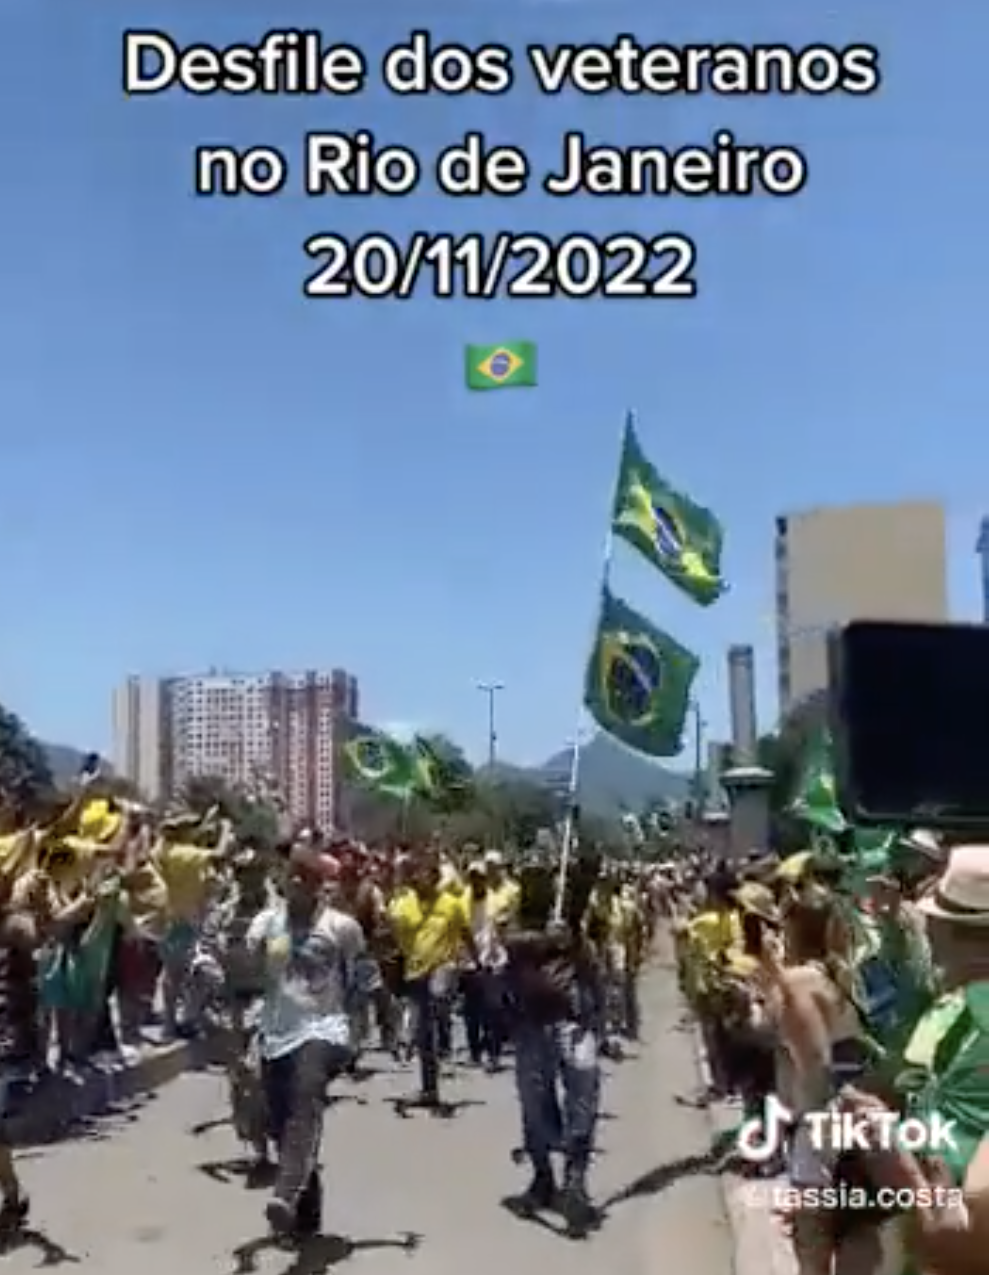 BREAKING: Veterans Join Brazilian Protests Against Corrupt Election.